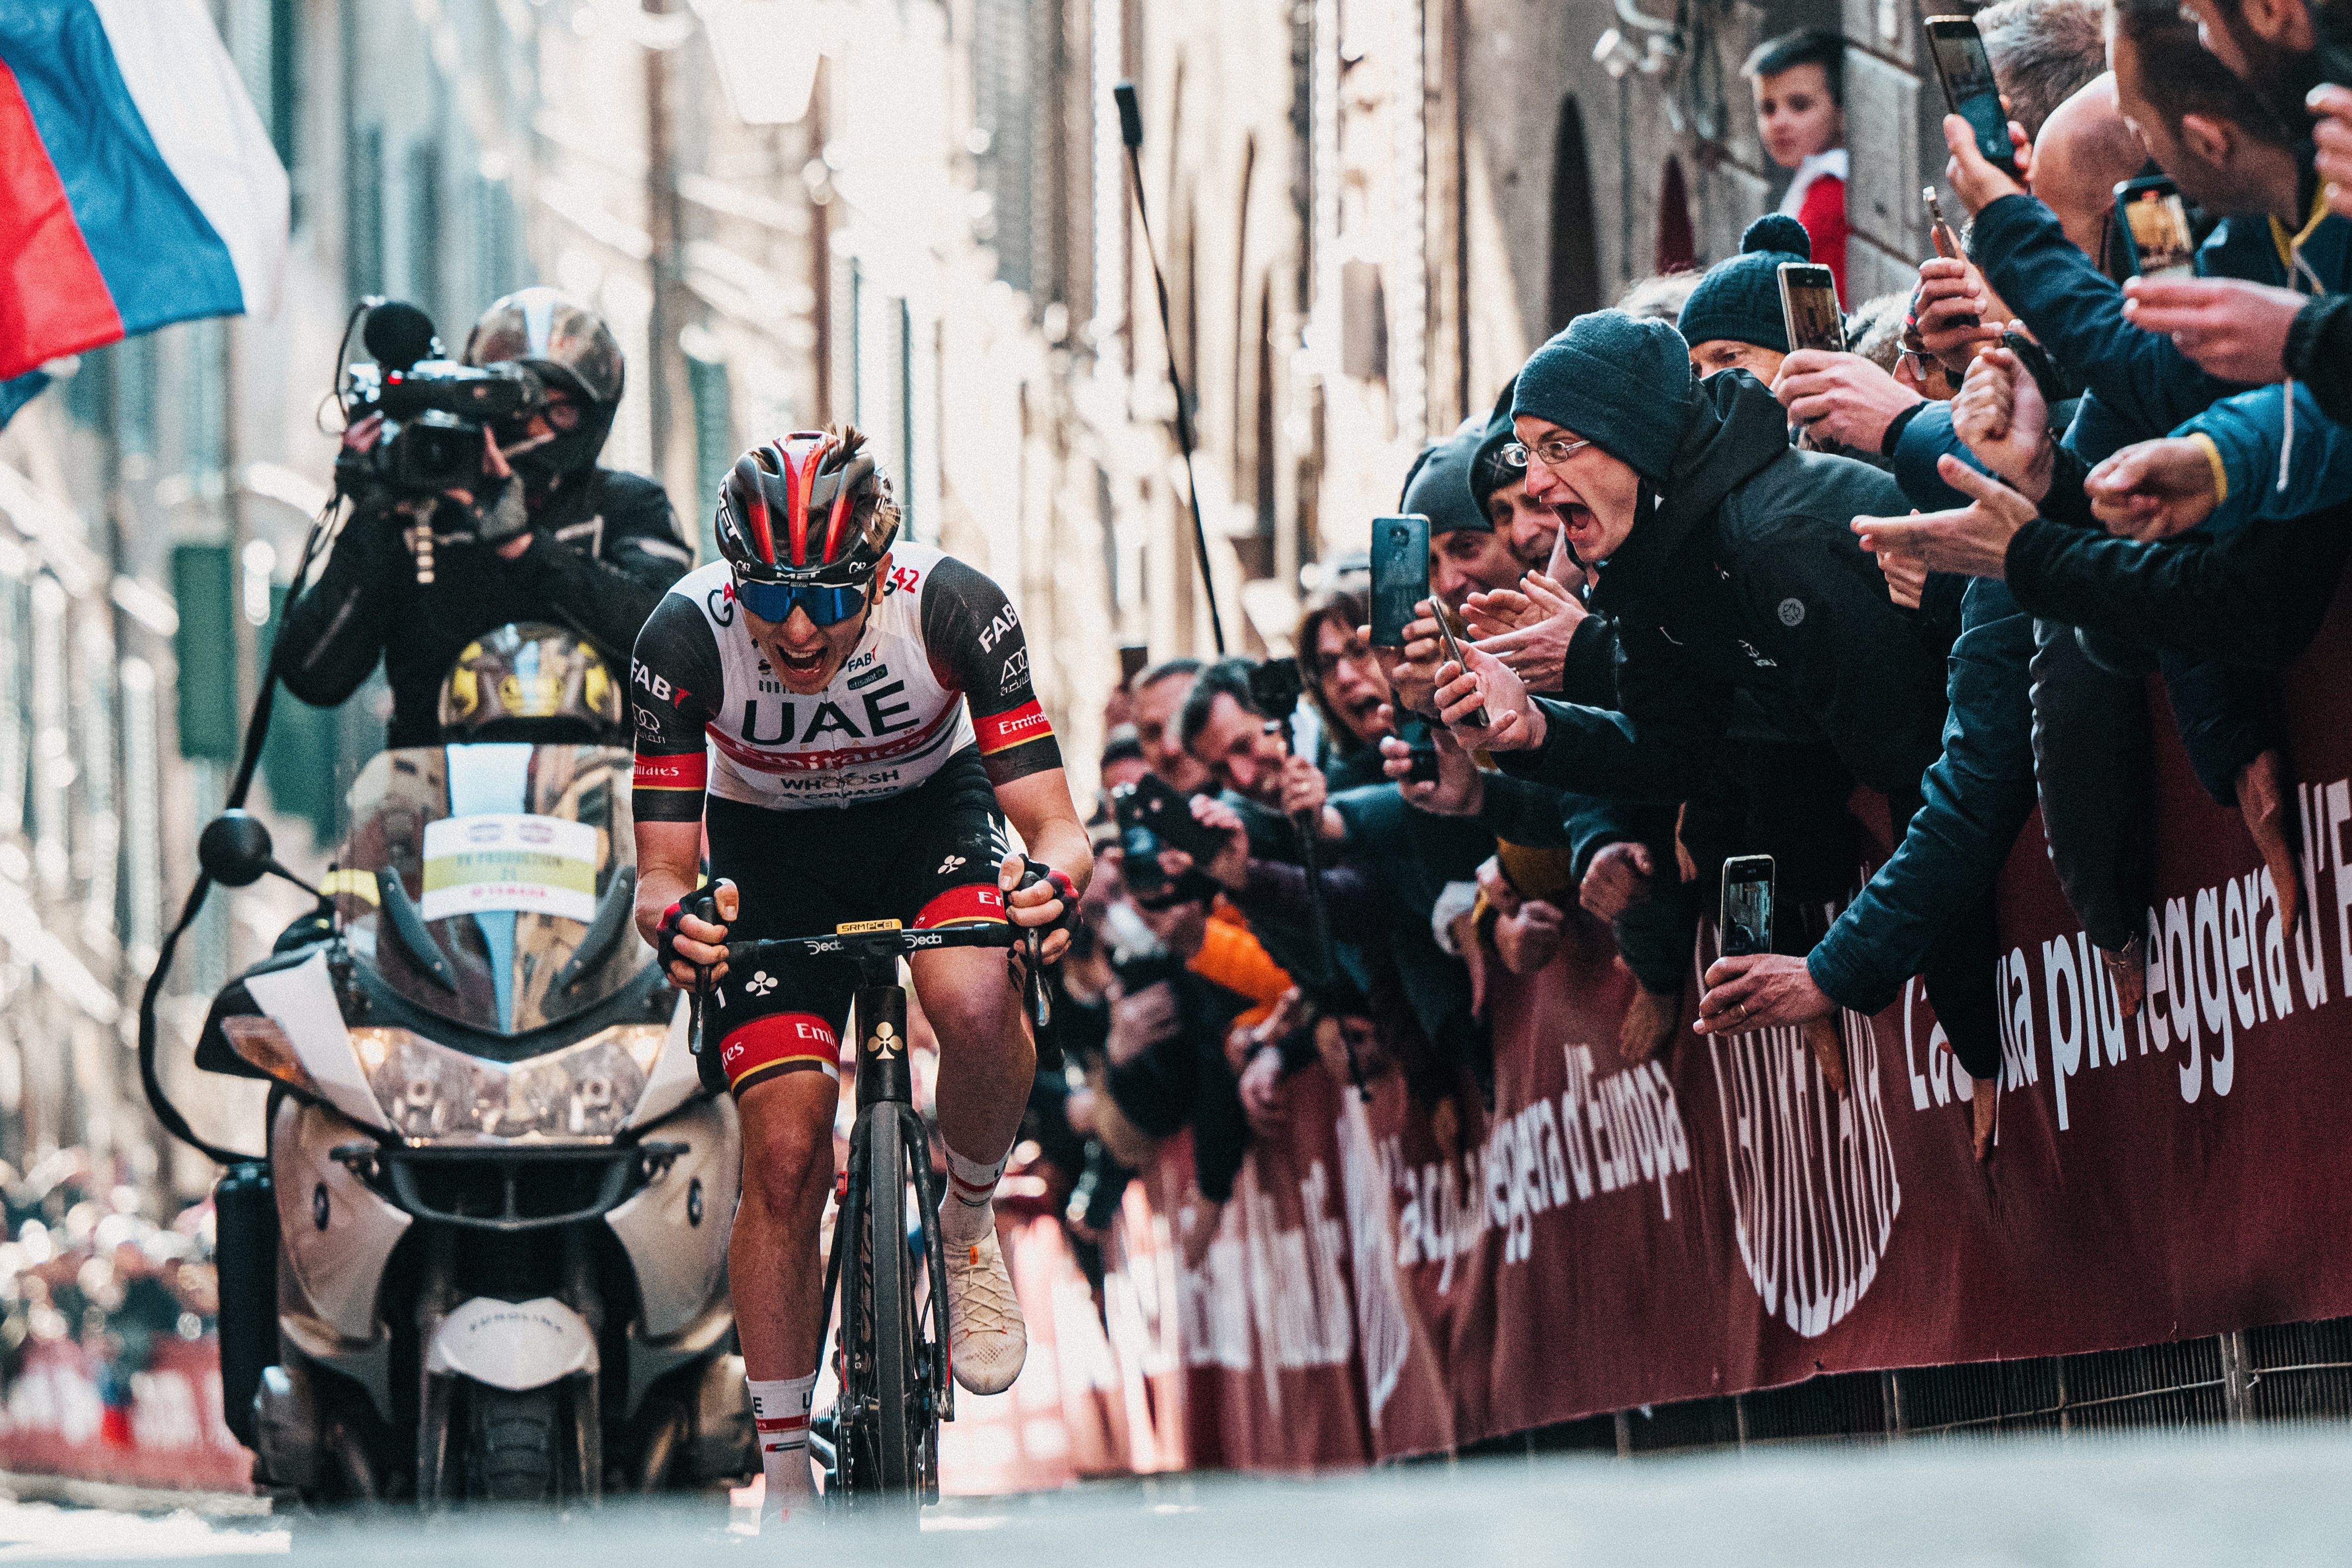 After a solo attack, Pogačar climbs the Via Santa Caterina on his way to win the 2022 Strade Bianche.